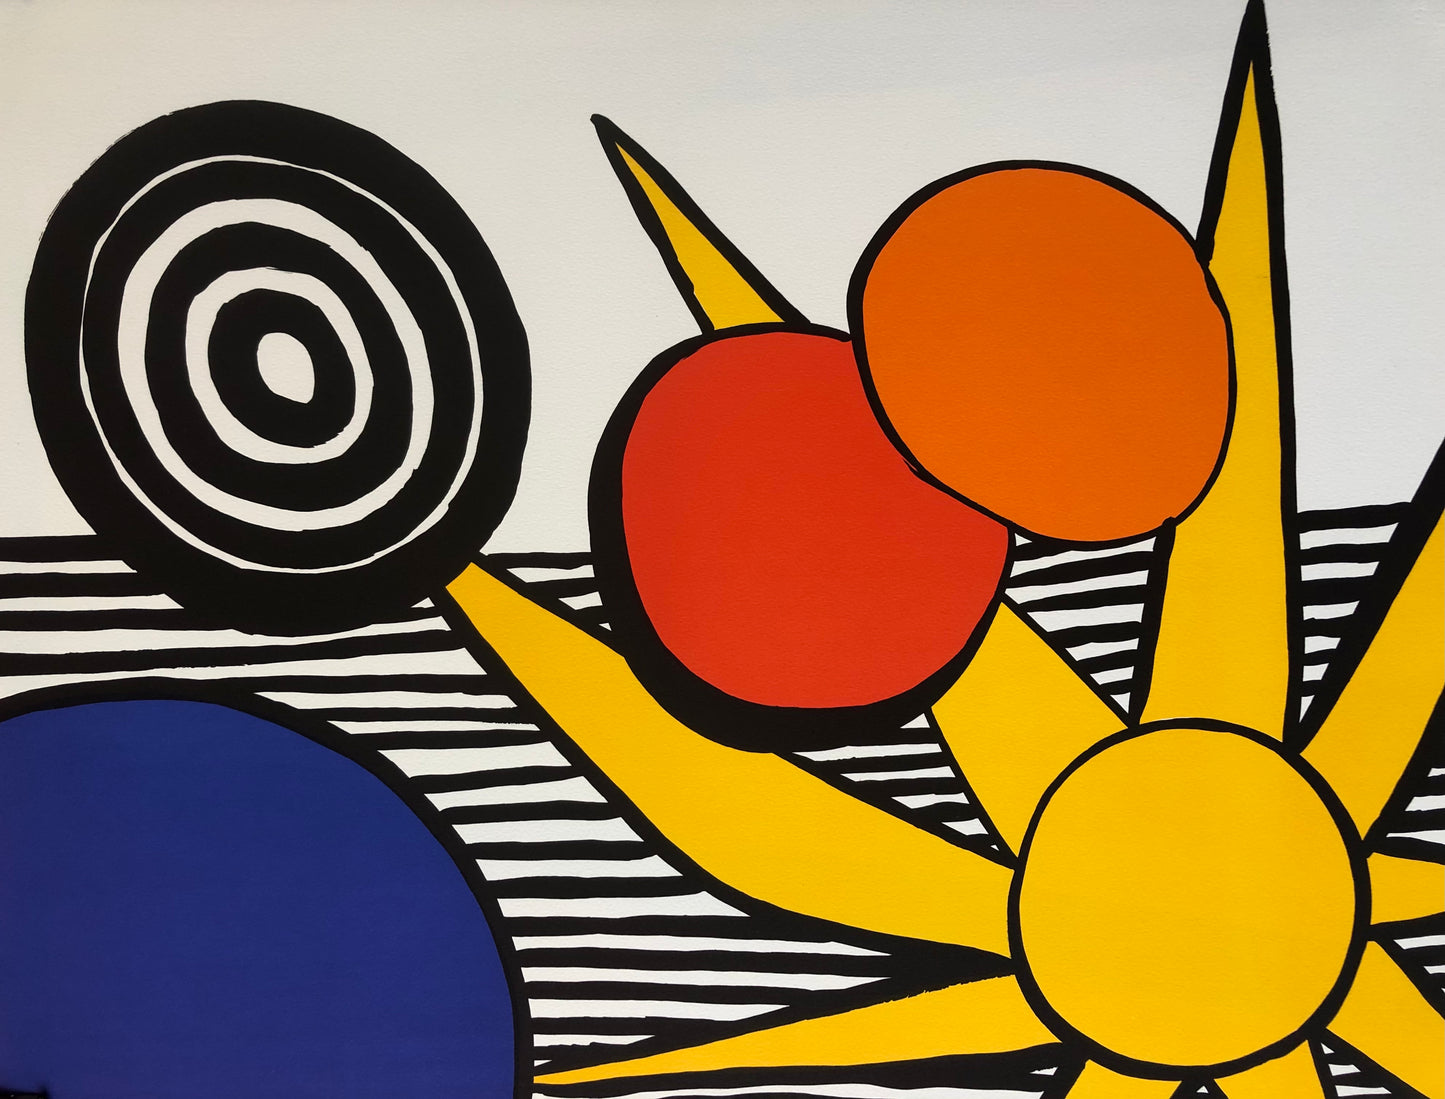 Calder Lithograph, "Sun with Planets"